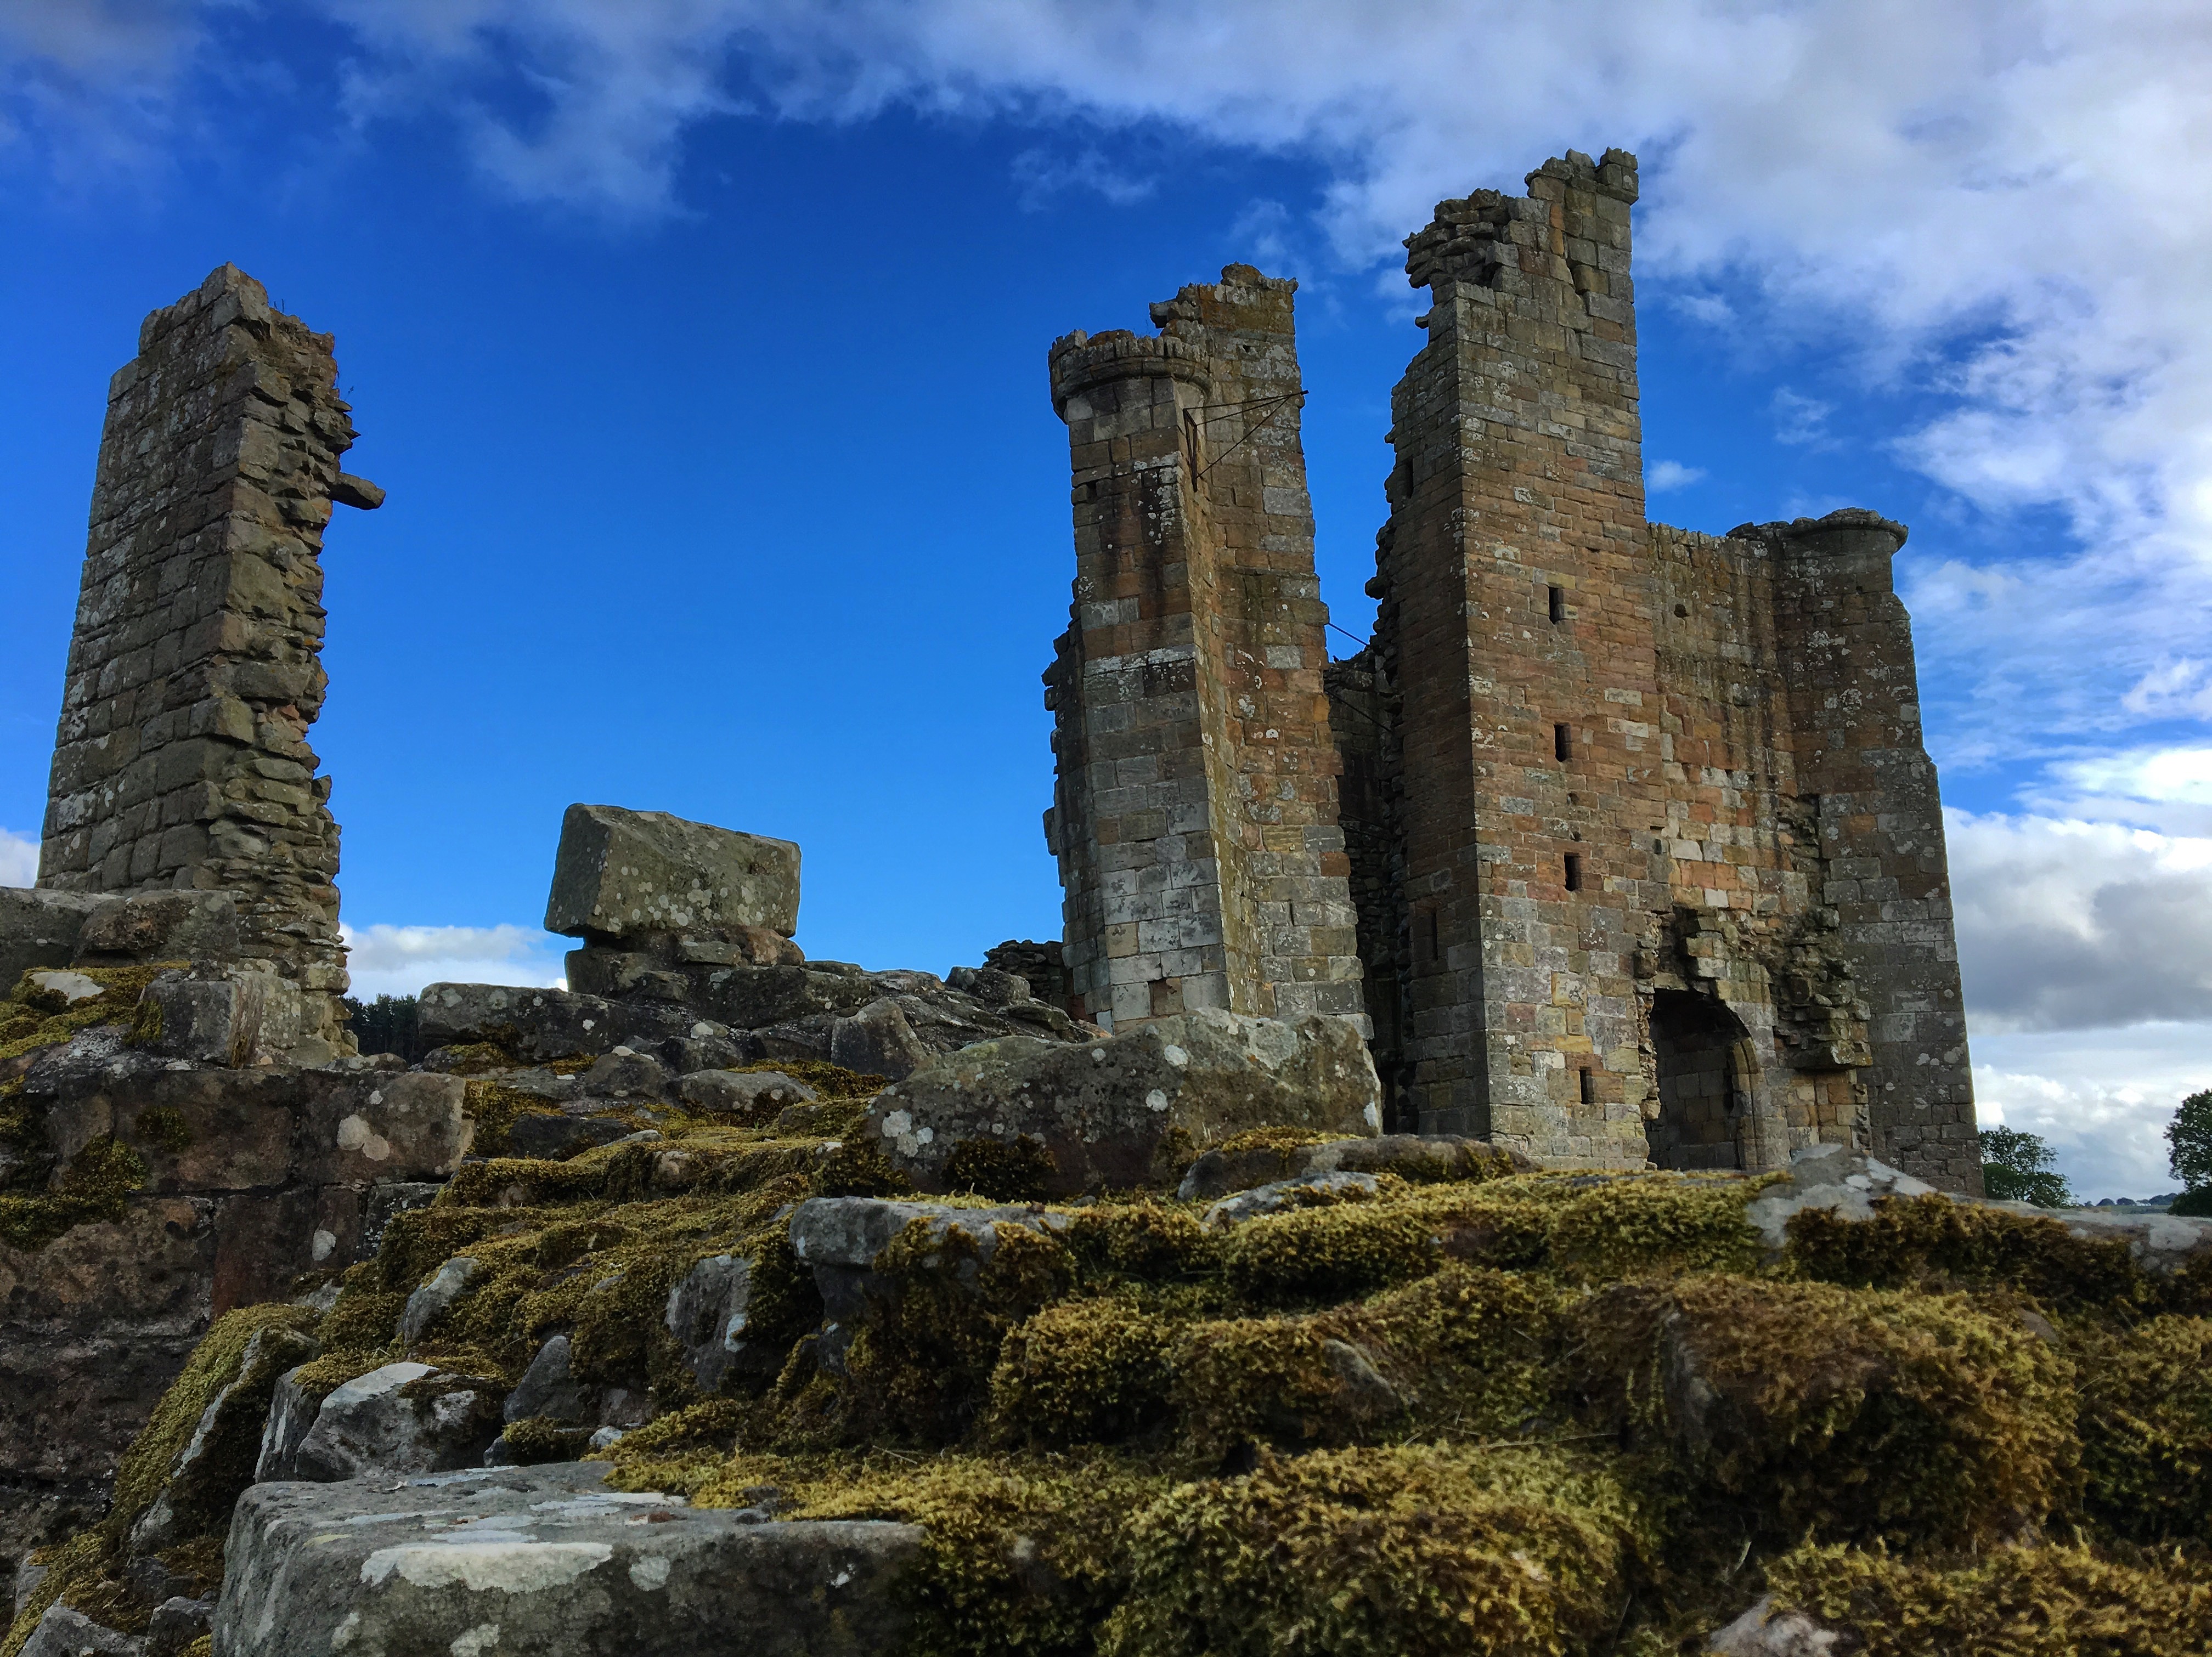 twolocalexplorers went for an adventure at Edlingham Castle in Northumberland